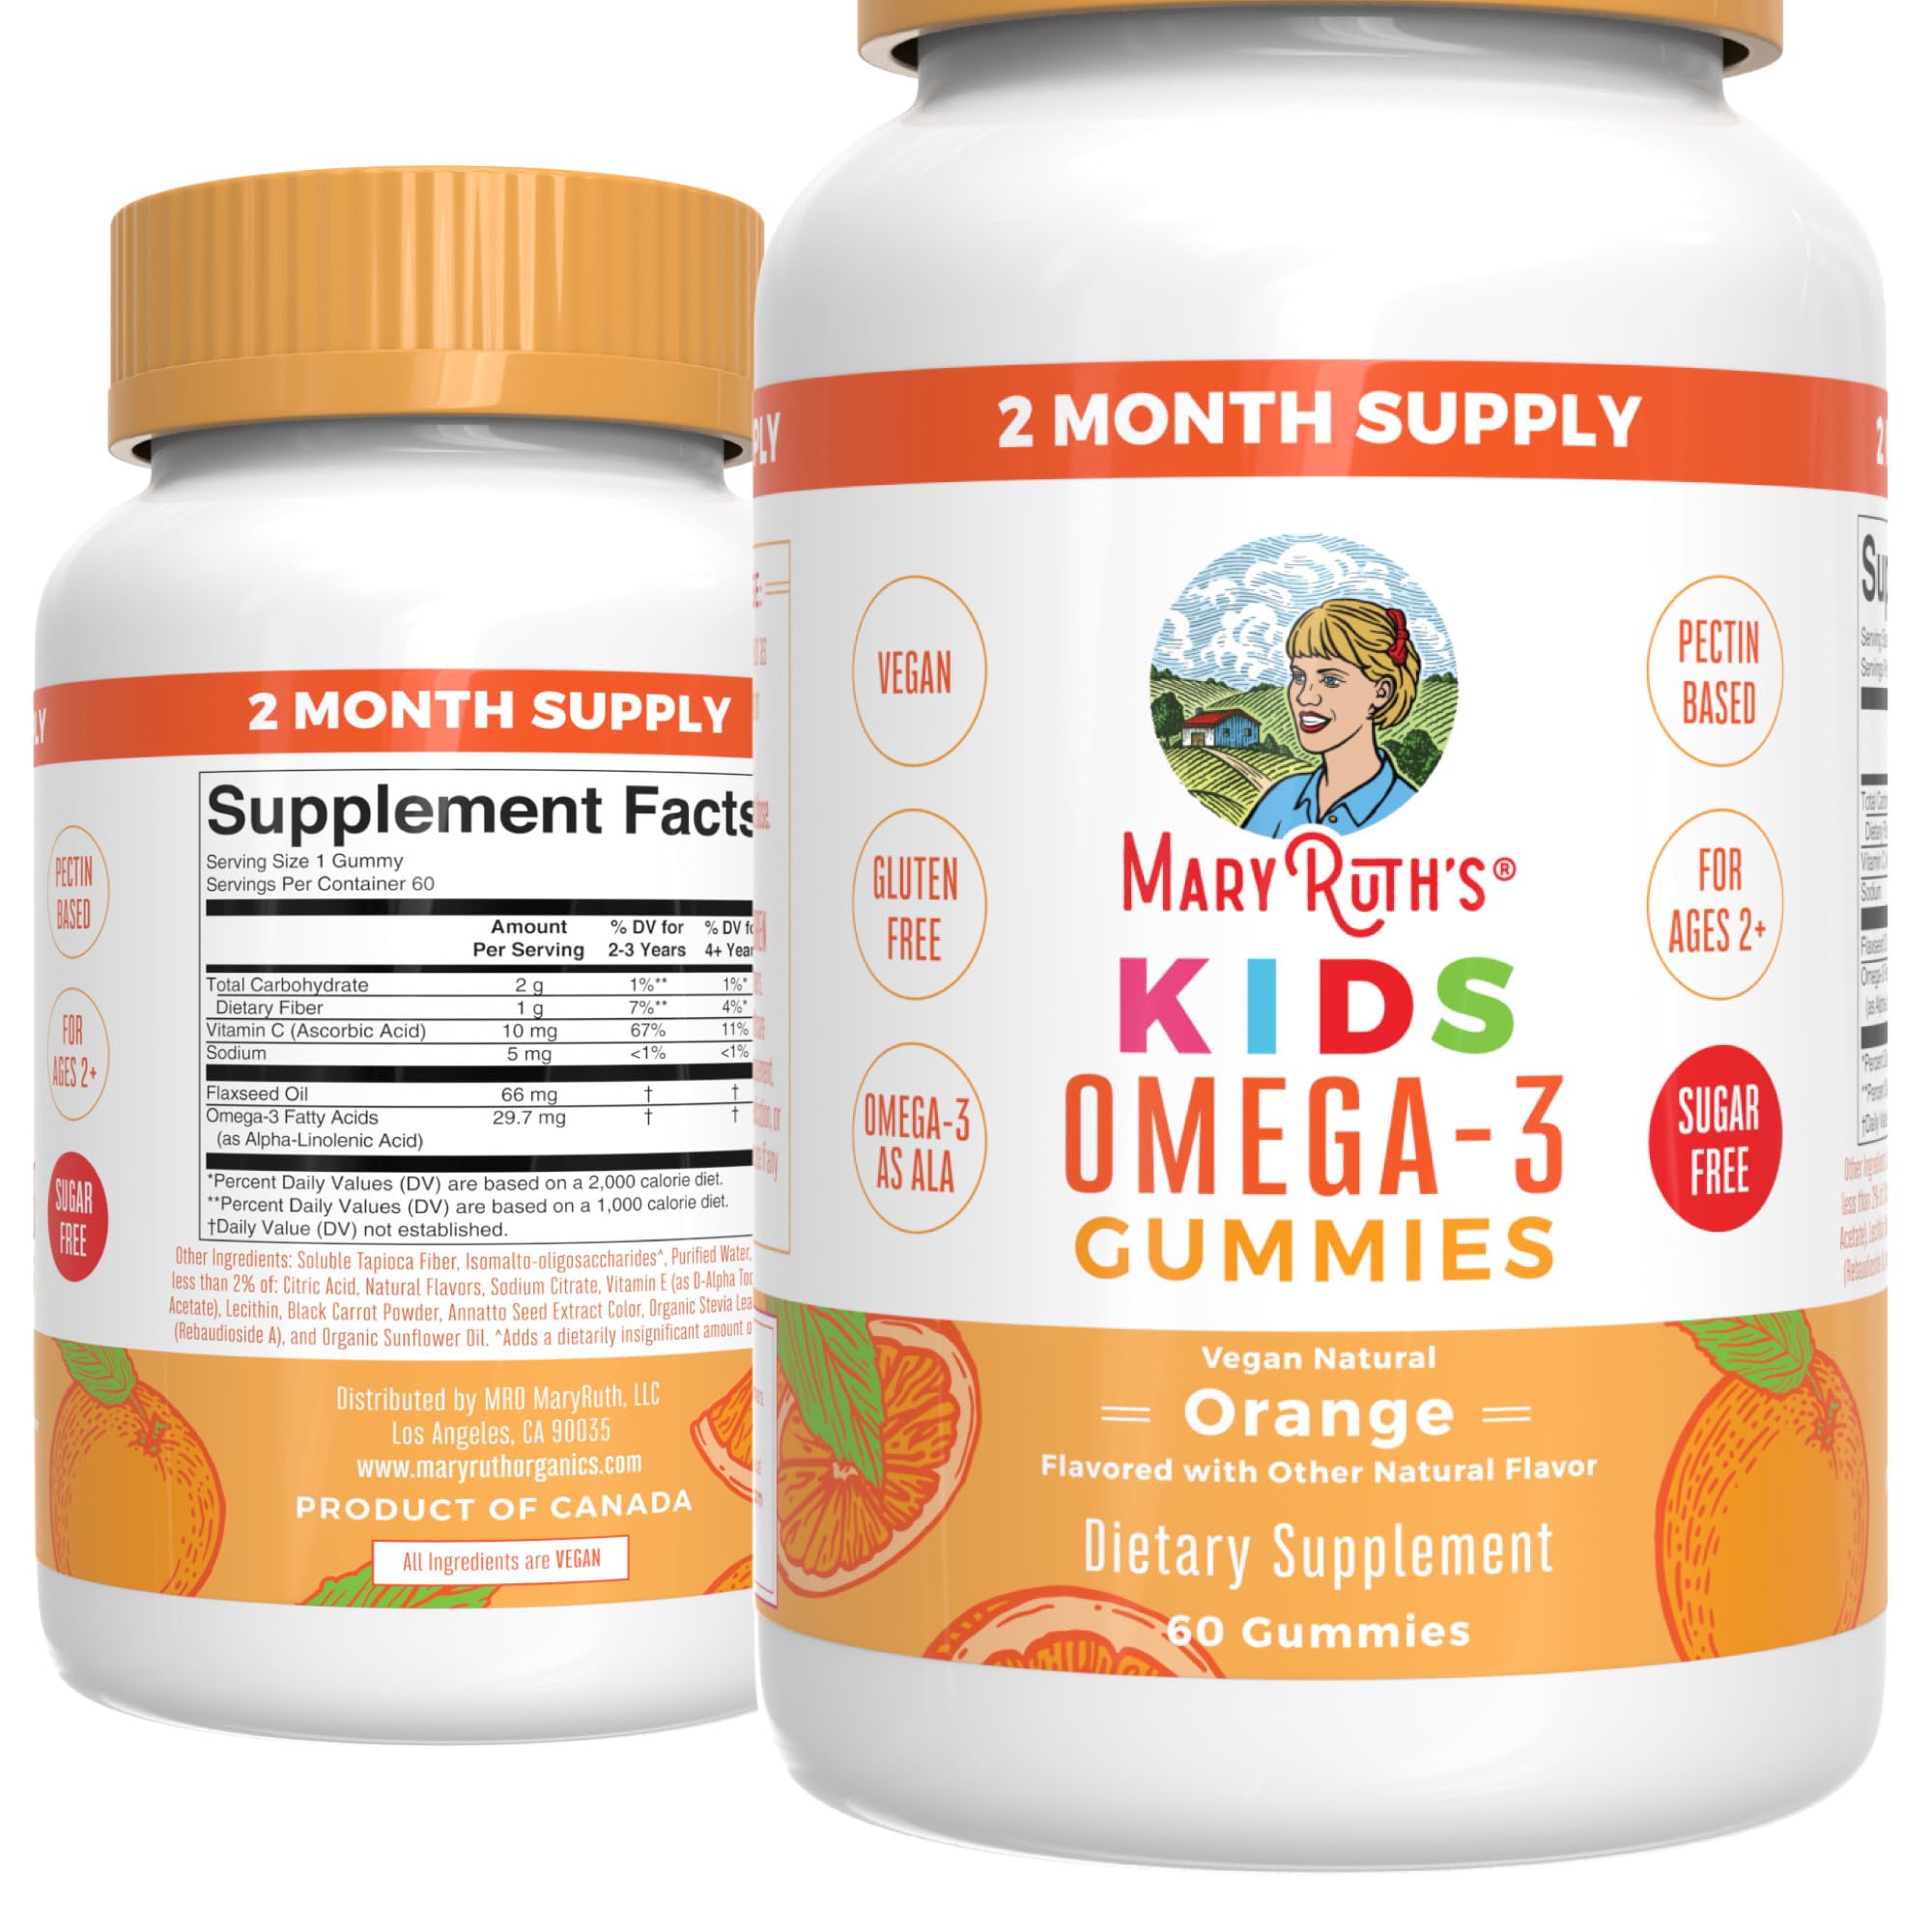 MaryRuth's Kids Multivitamin Gummies, Kids Omega 3, and Kids Probiotic Gummies, 3-Pack Bundle for Immune Support, Bone Health, Digestive & Gut Health, and Overall Health, Vegan, Non-GMO